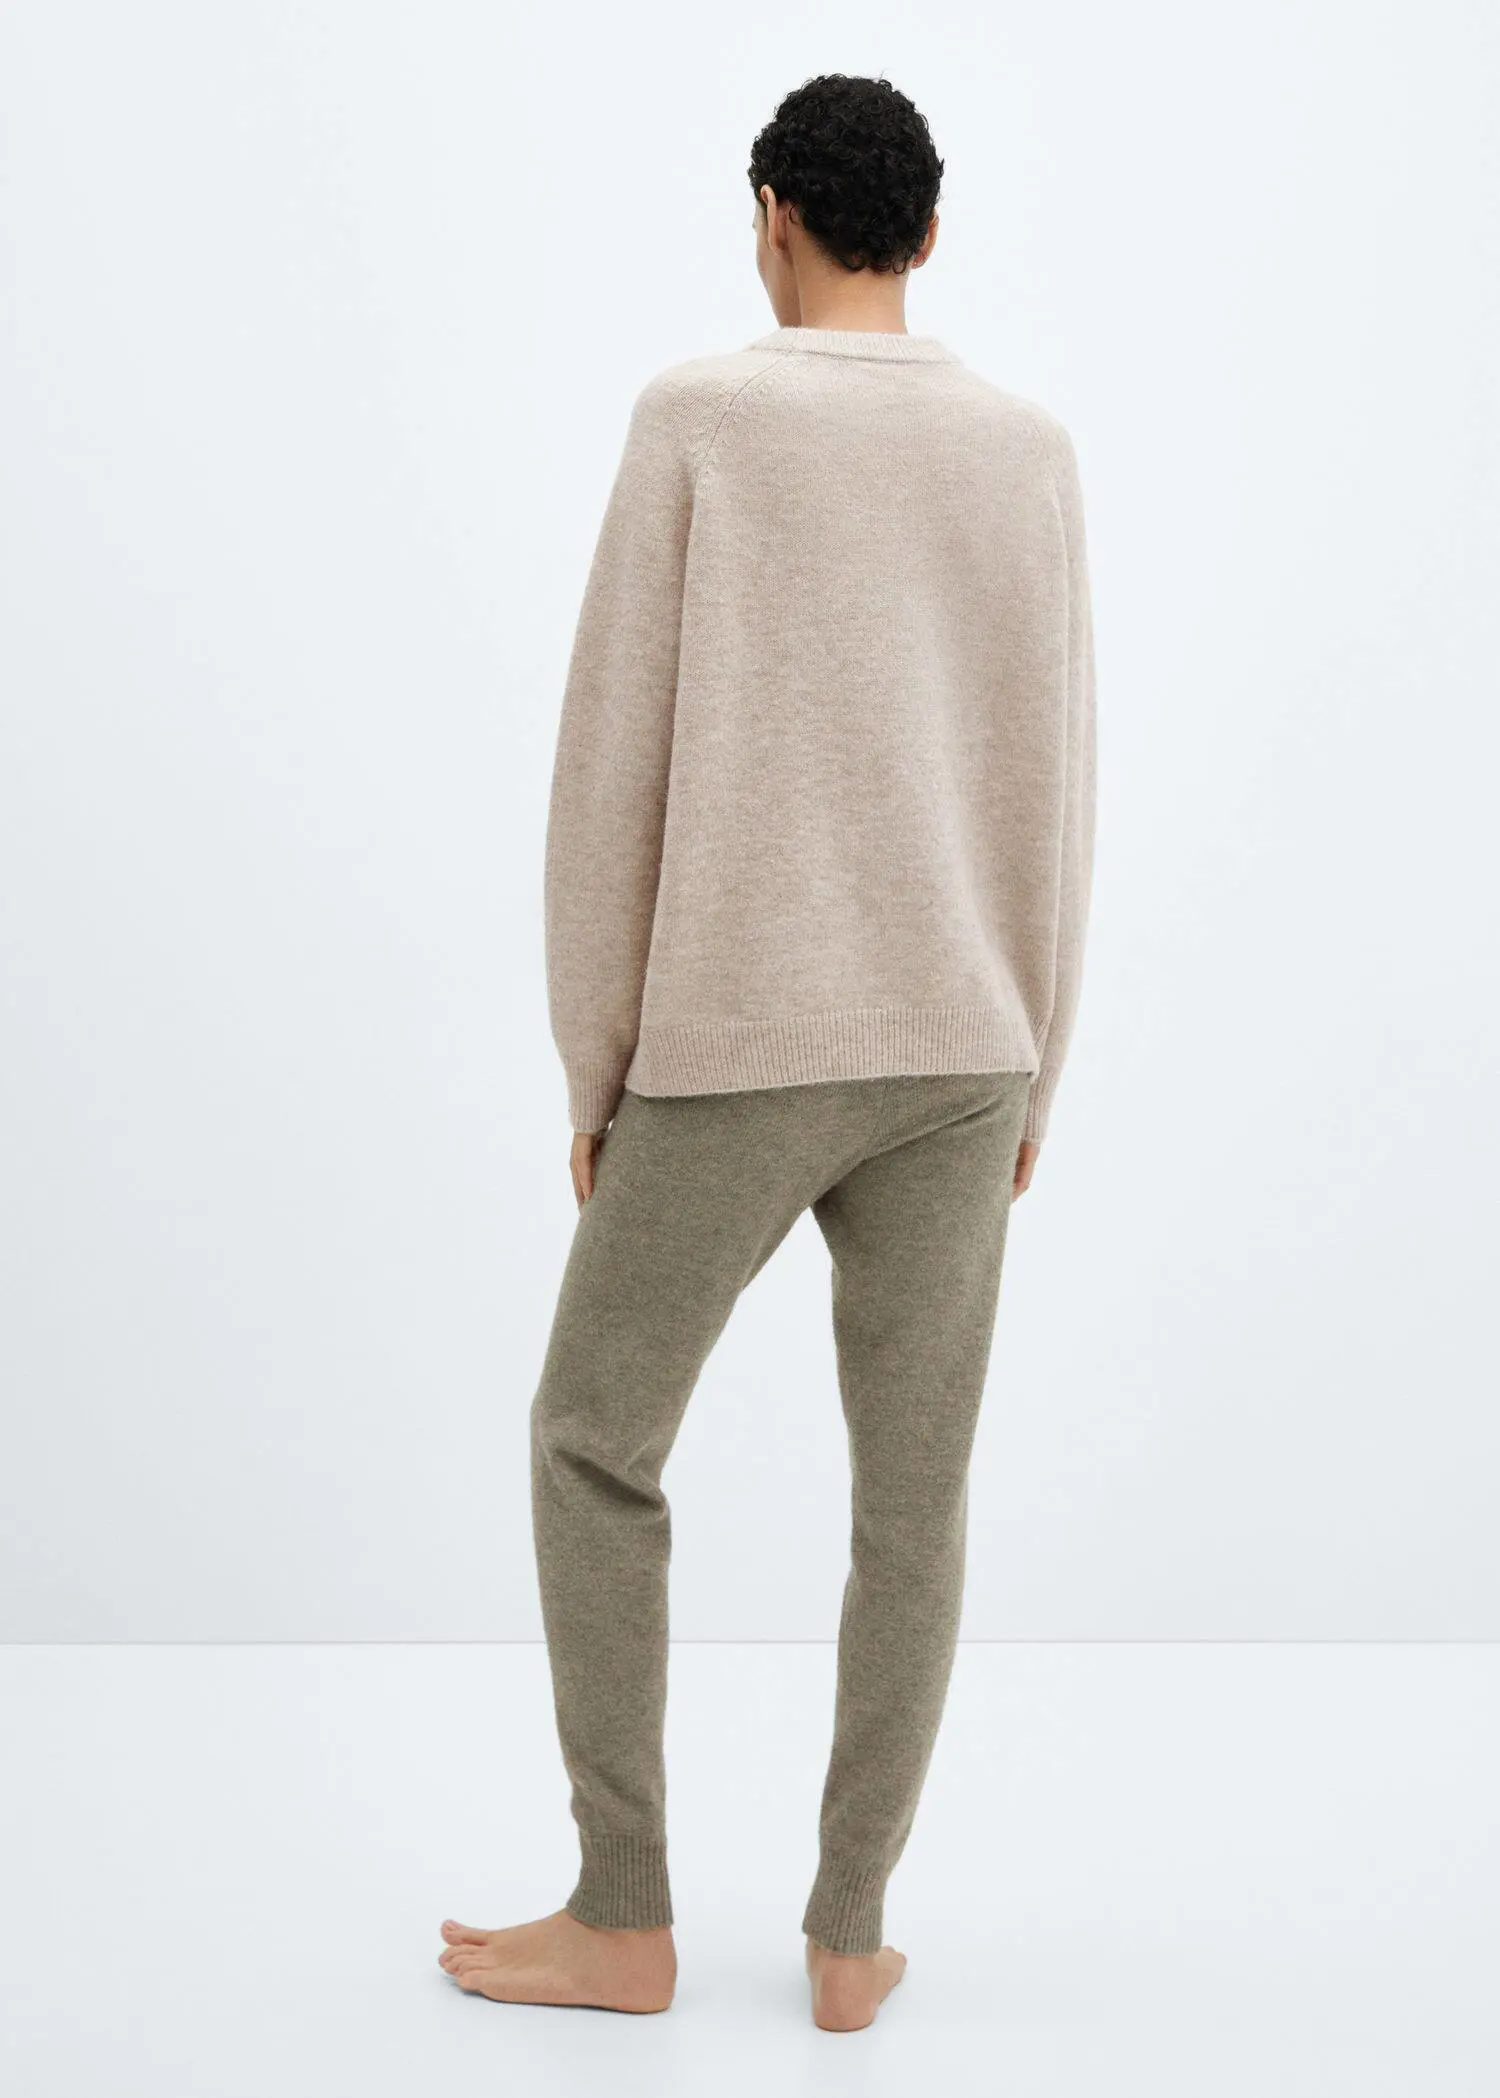 Mango Roundneck knitted sweater. 3